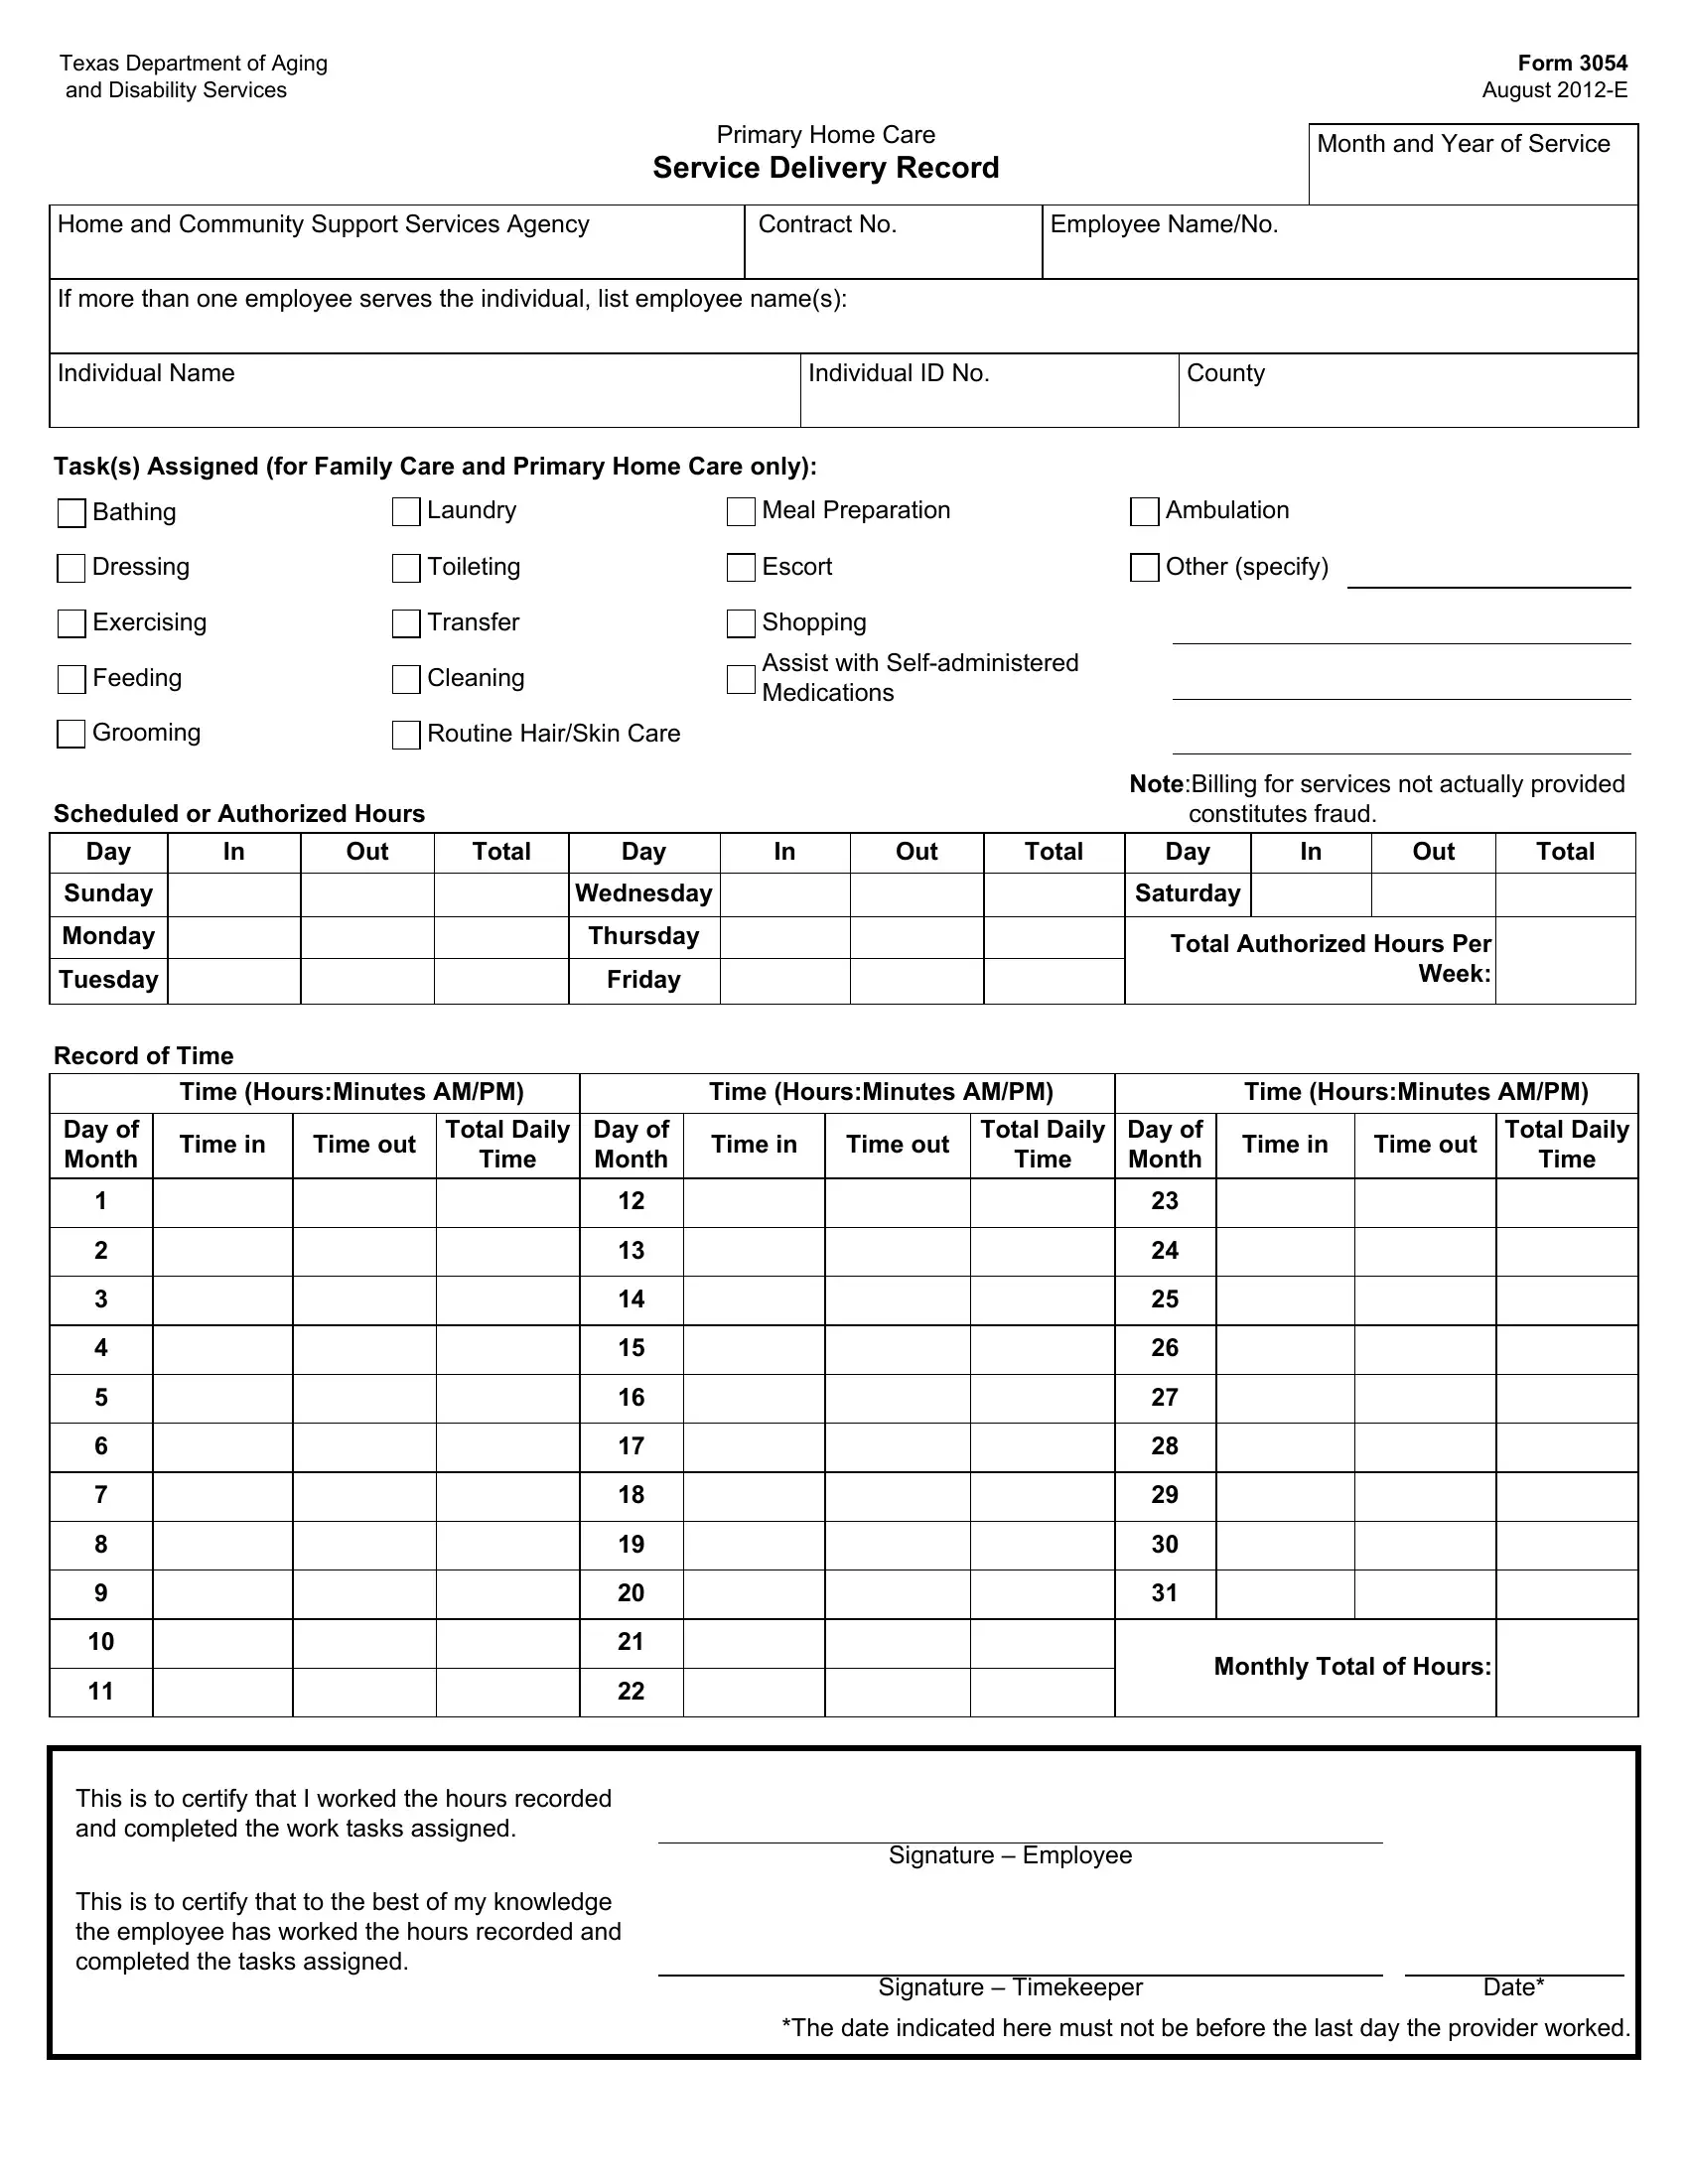 Form 3054 Preview